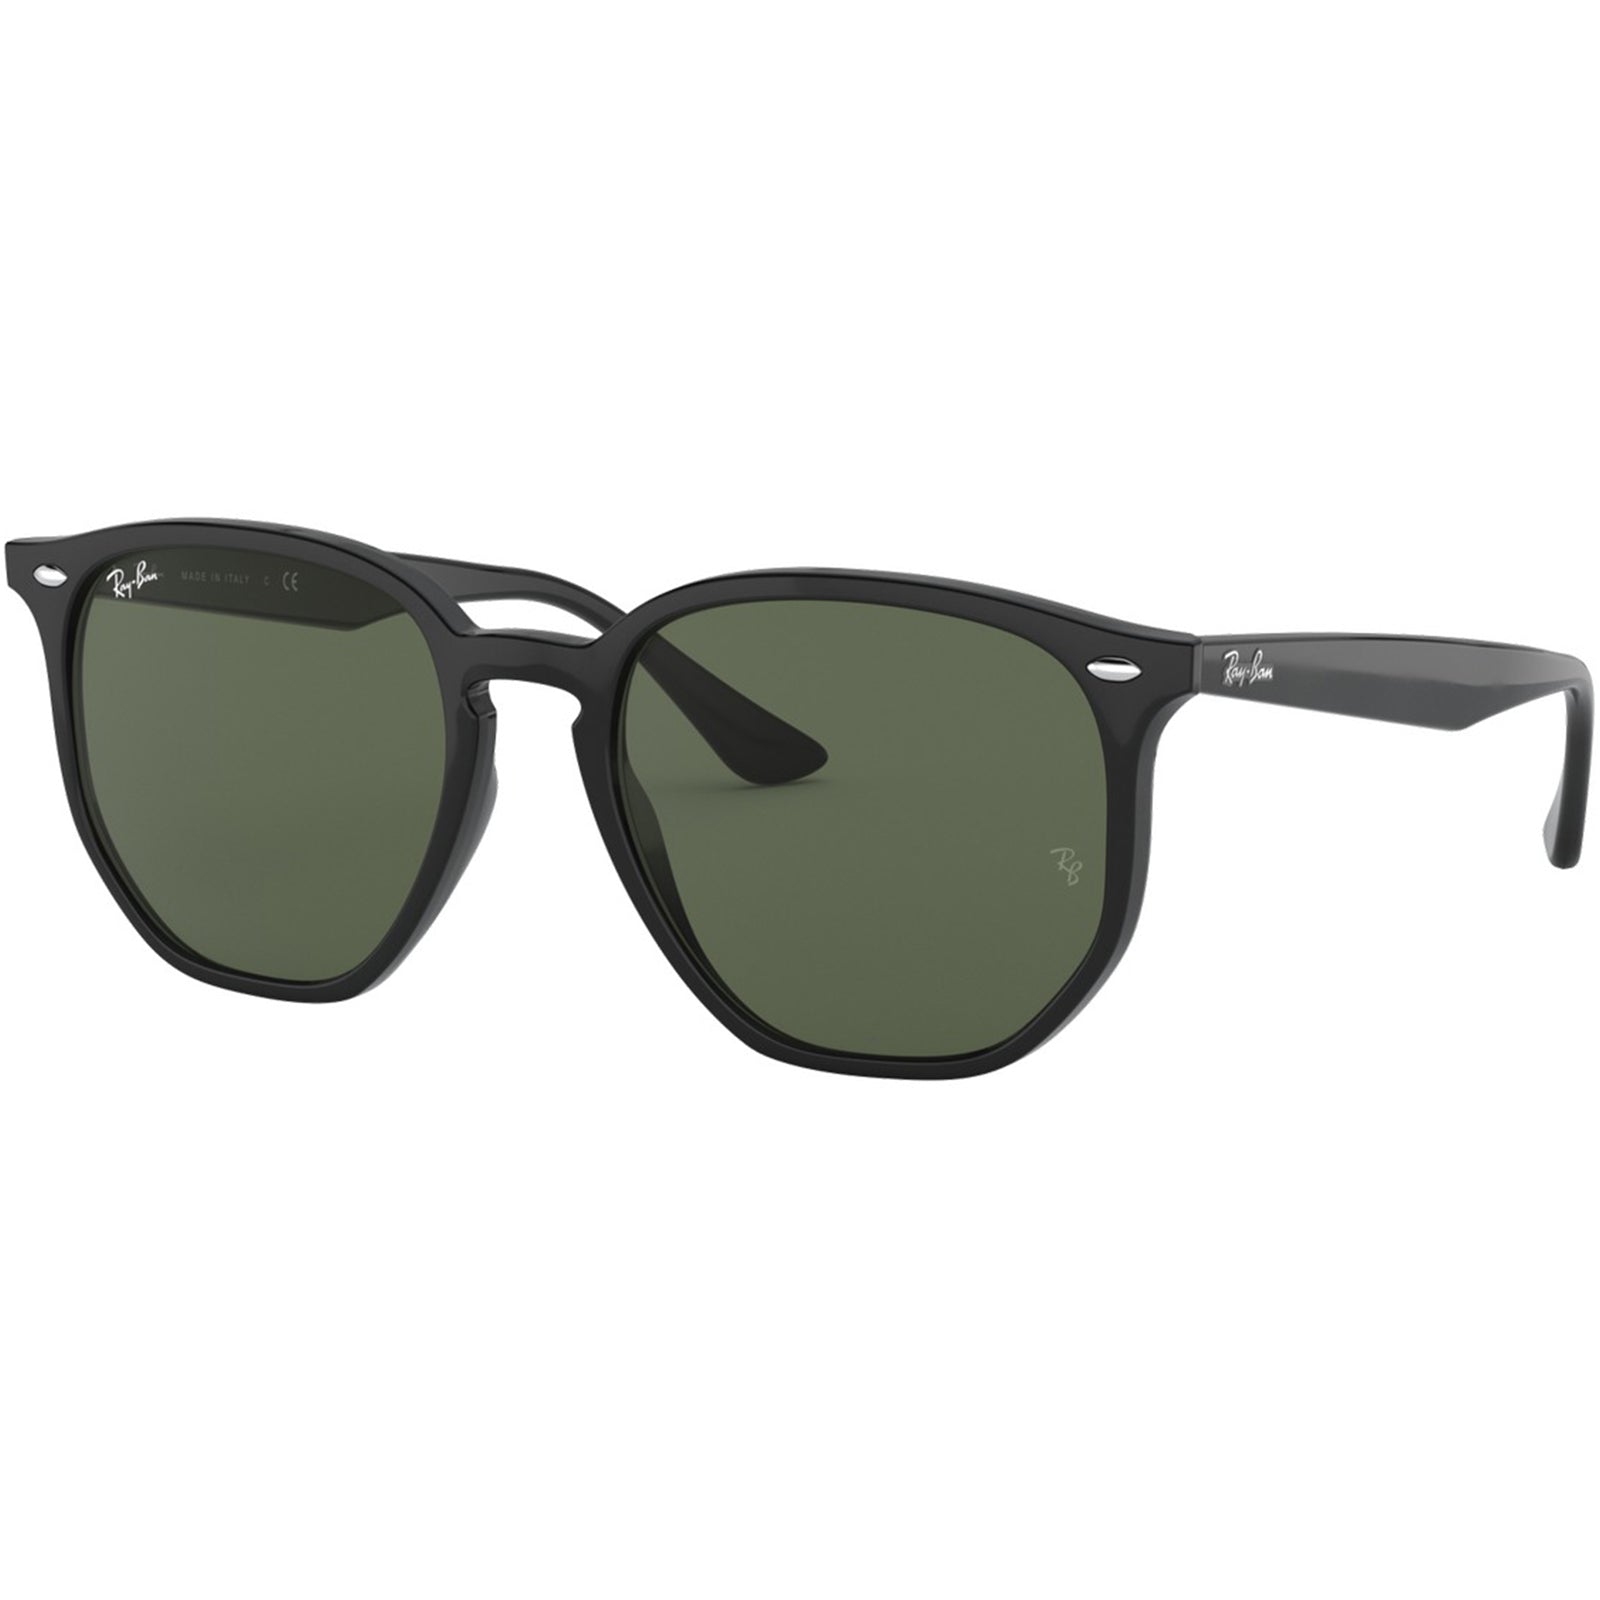 Ray-Ban RB4306 Adult Lifestyle Sunglasses-0RB4306